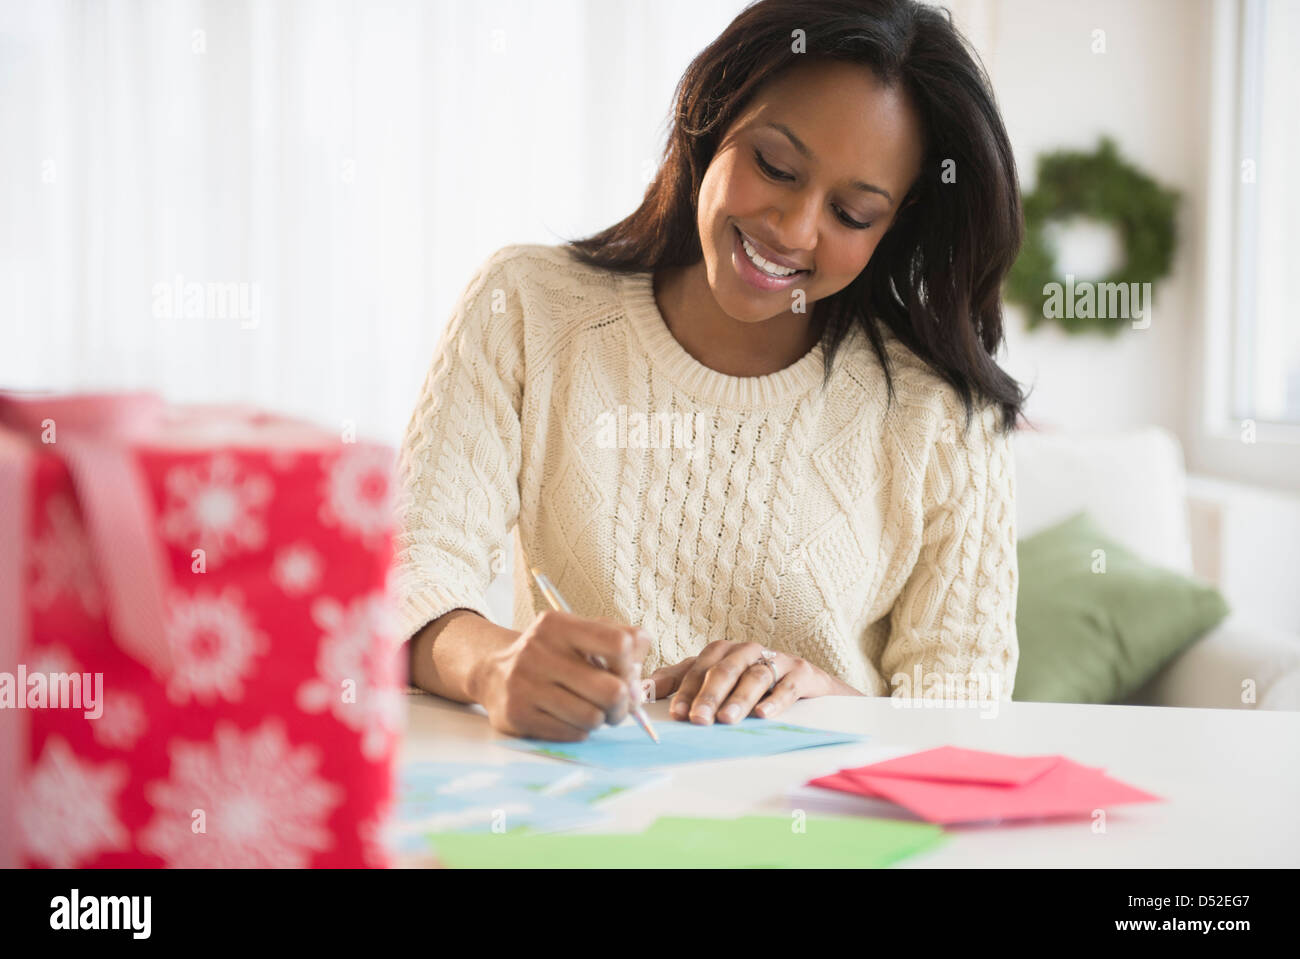 African American woman writing at desk Stock Photo